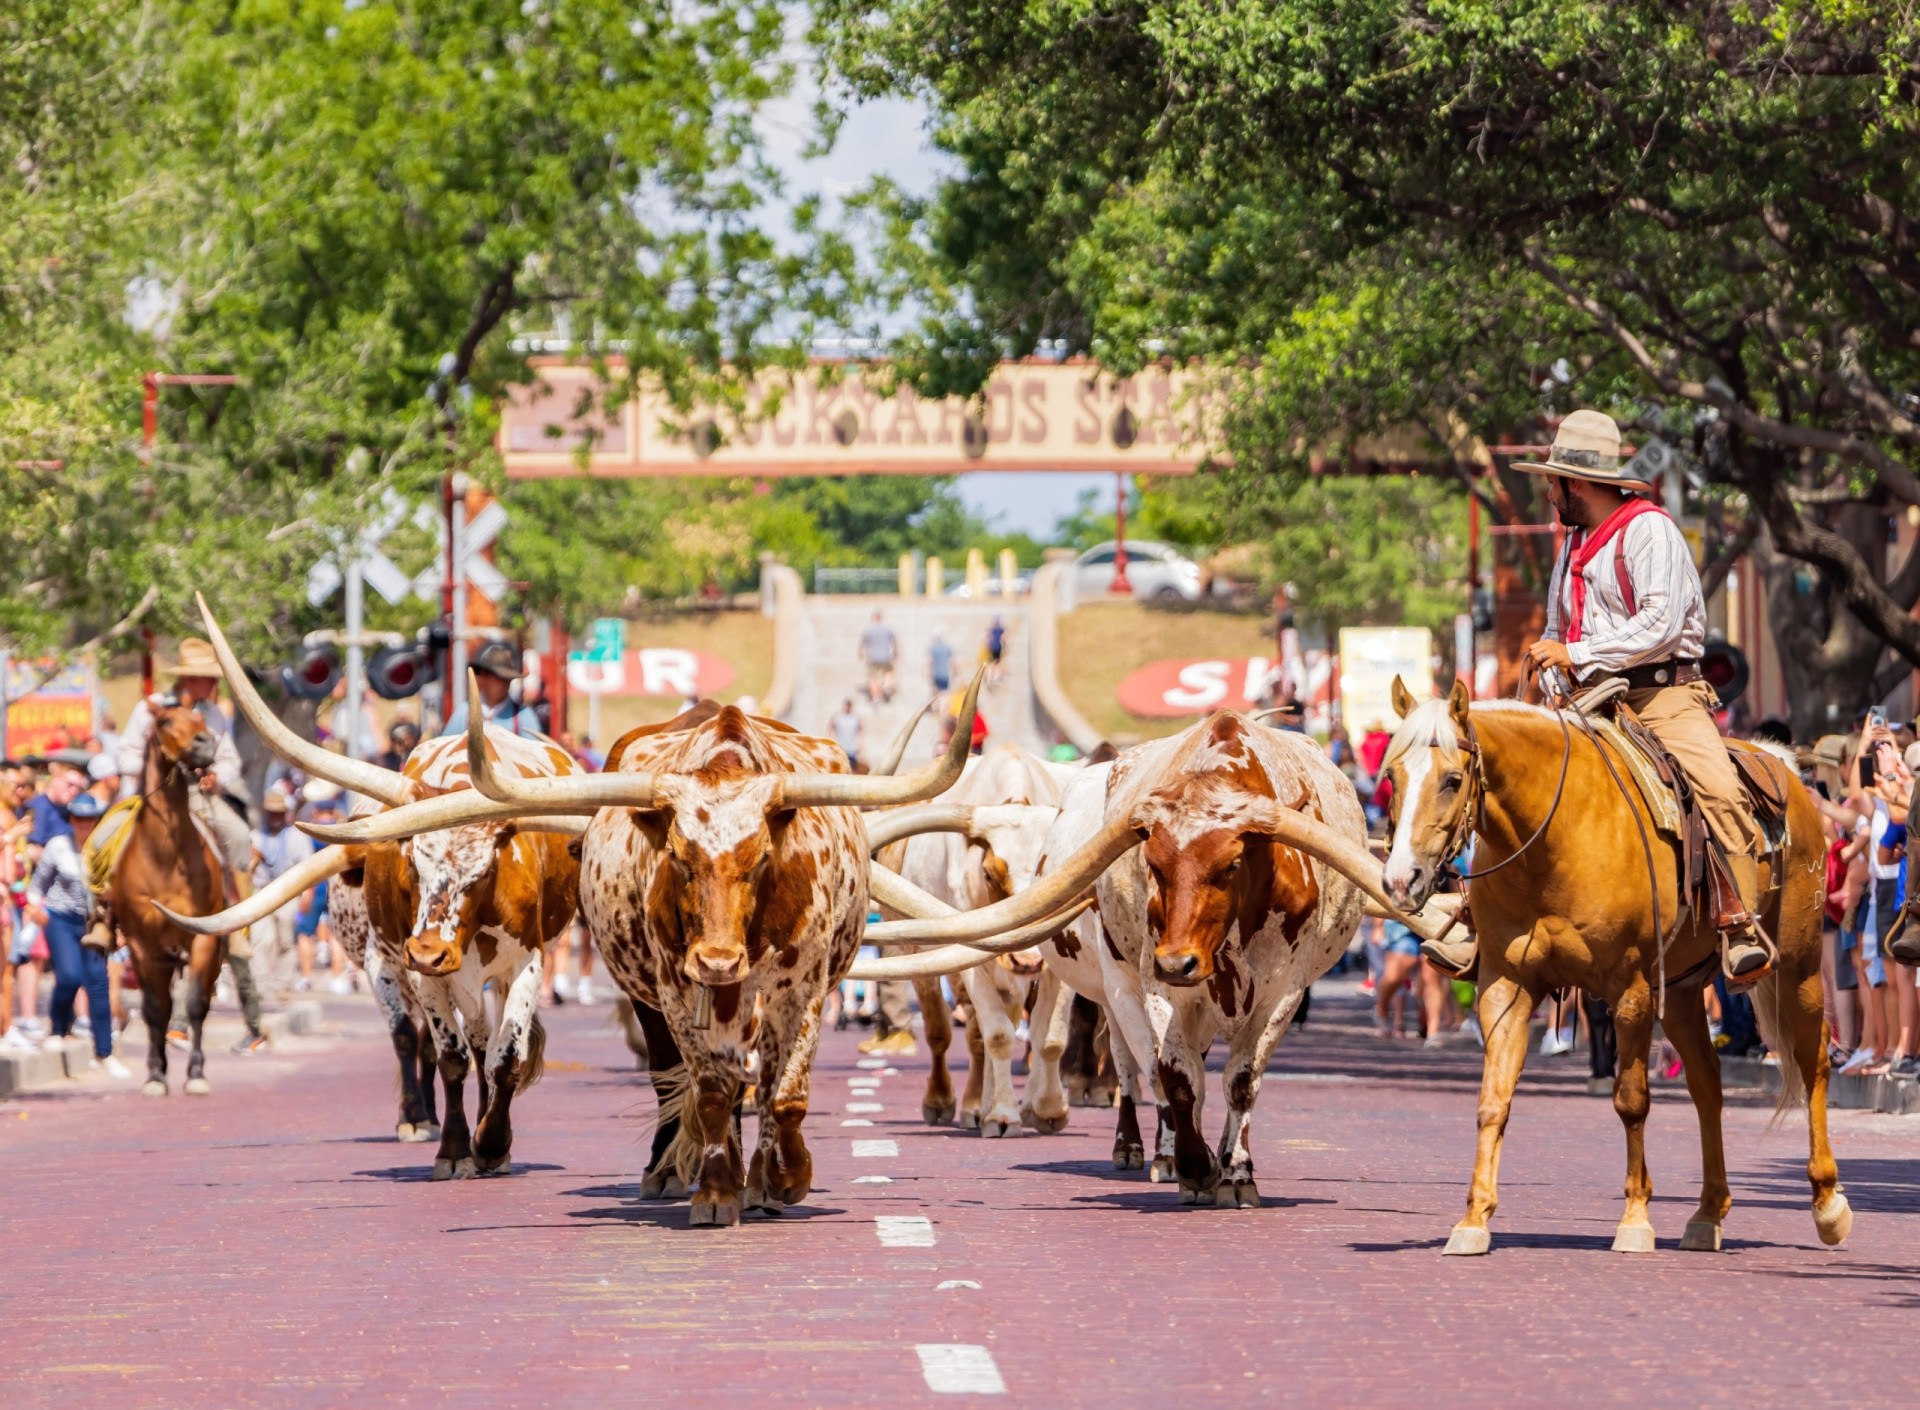 <p>Looking for a memorable Western experience? Things like stock shows, cattle drives, and bull riding? Then head over to Fort Worth, Texas. And here's a tip: the National Cowgirl Museum and Hall of Fame will host a 2024 exhibit honoring the Mexican female horseback riding tradition of <em>escaramuza charra</em>. Saddle up, ladies!</p><p>You may also like:<a href="https://www.starsinsider.com/n/463335?utm_source=msn.com&utm_medium=display&utm_campaign=referral_description&utm_content=636762en-en_selected"> What is licorice good for?</a></p>